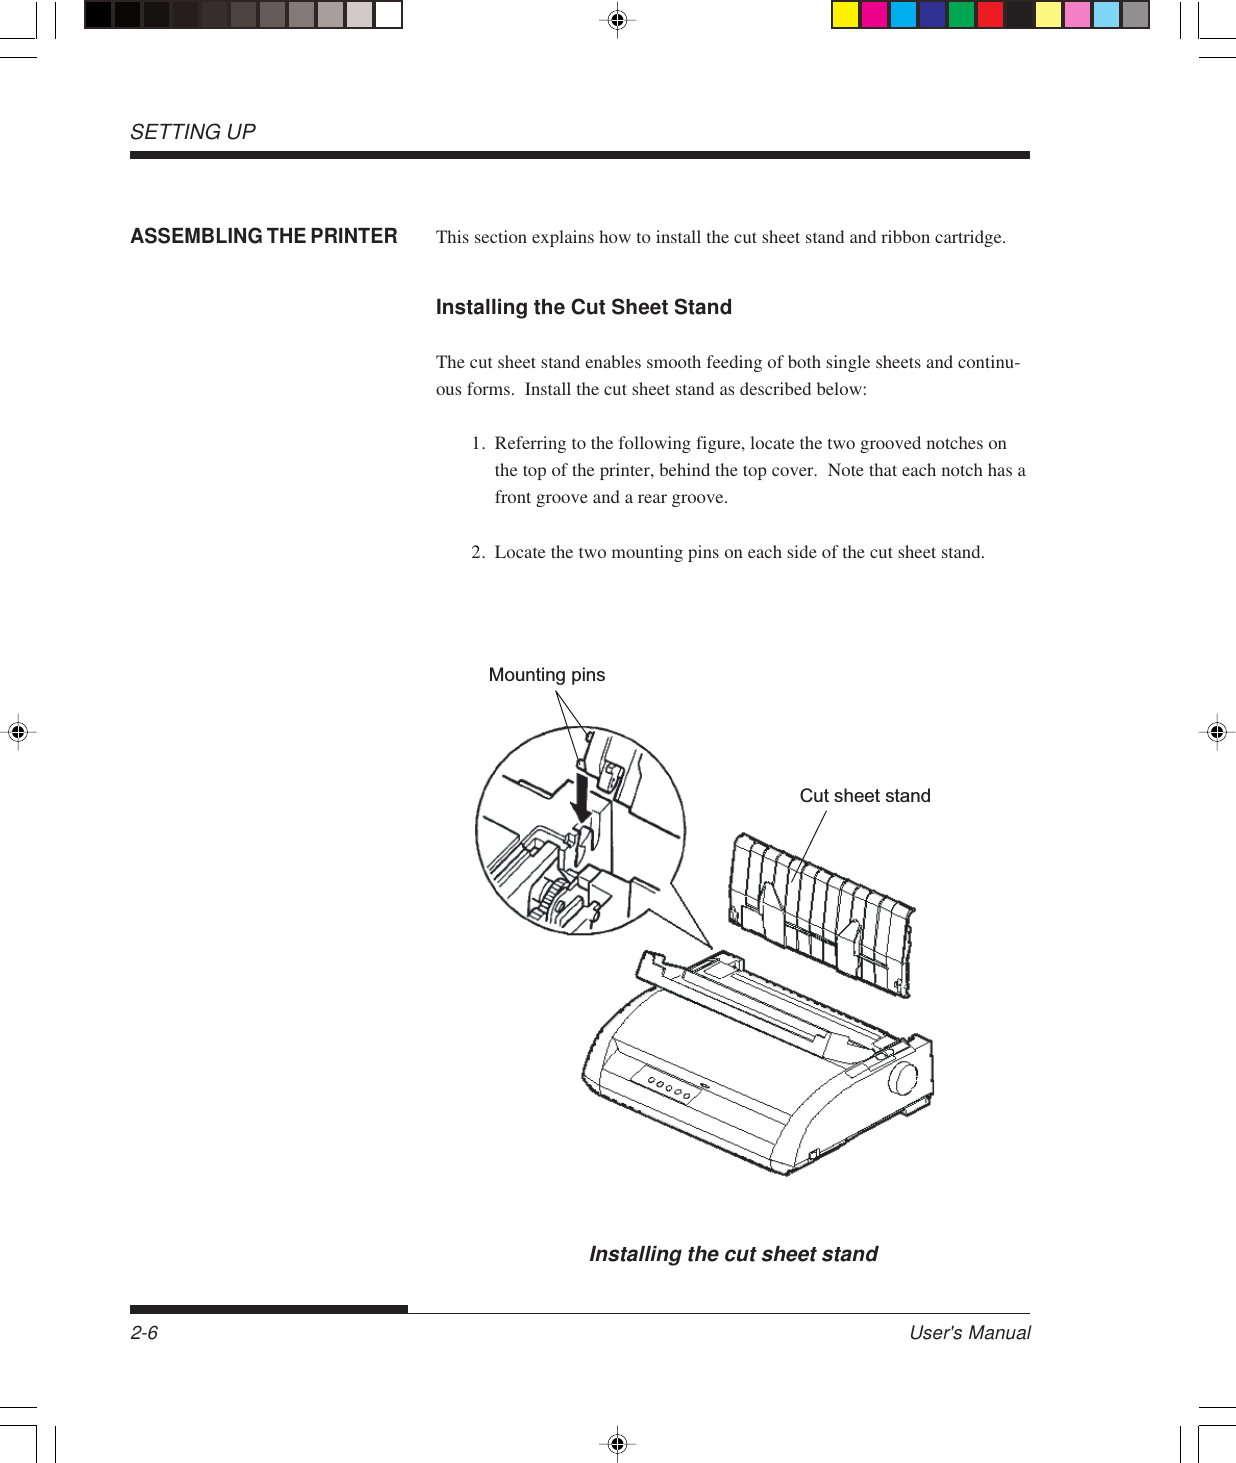 SETTING UP2-6 User&apos;s ManualASSEMBLING THE PRINTERThis section explains how to install the cut sheet stand and ribbon cartridge.Installing the Cut Sheet StandThe cut sheet stand enables smooth feeding of both single sheets and continu-ous forms.  Install the cut sheet stand as described below:1. Referring to the following figure, locate the two grooved notches onthe top of the printer, behind the top cover.  Note that each notch has afront groove and a rear groove.2. Locate the two mounting pins on each side of the cut sheet stand.Installing the cut sheet standCut sheet standMounting pins